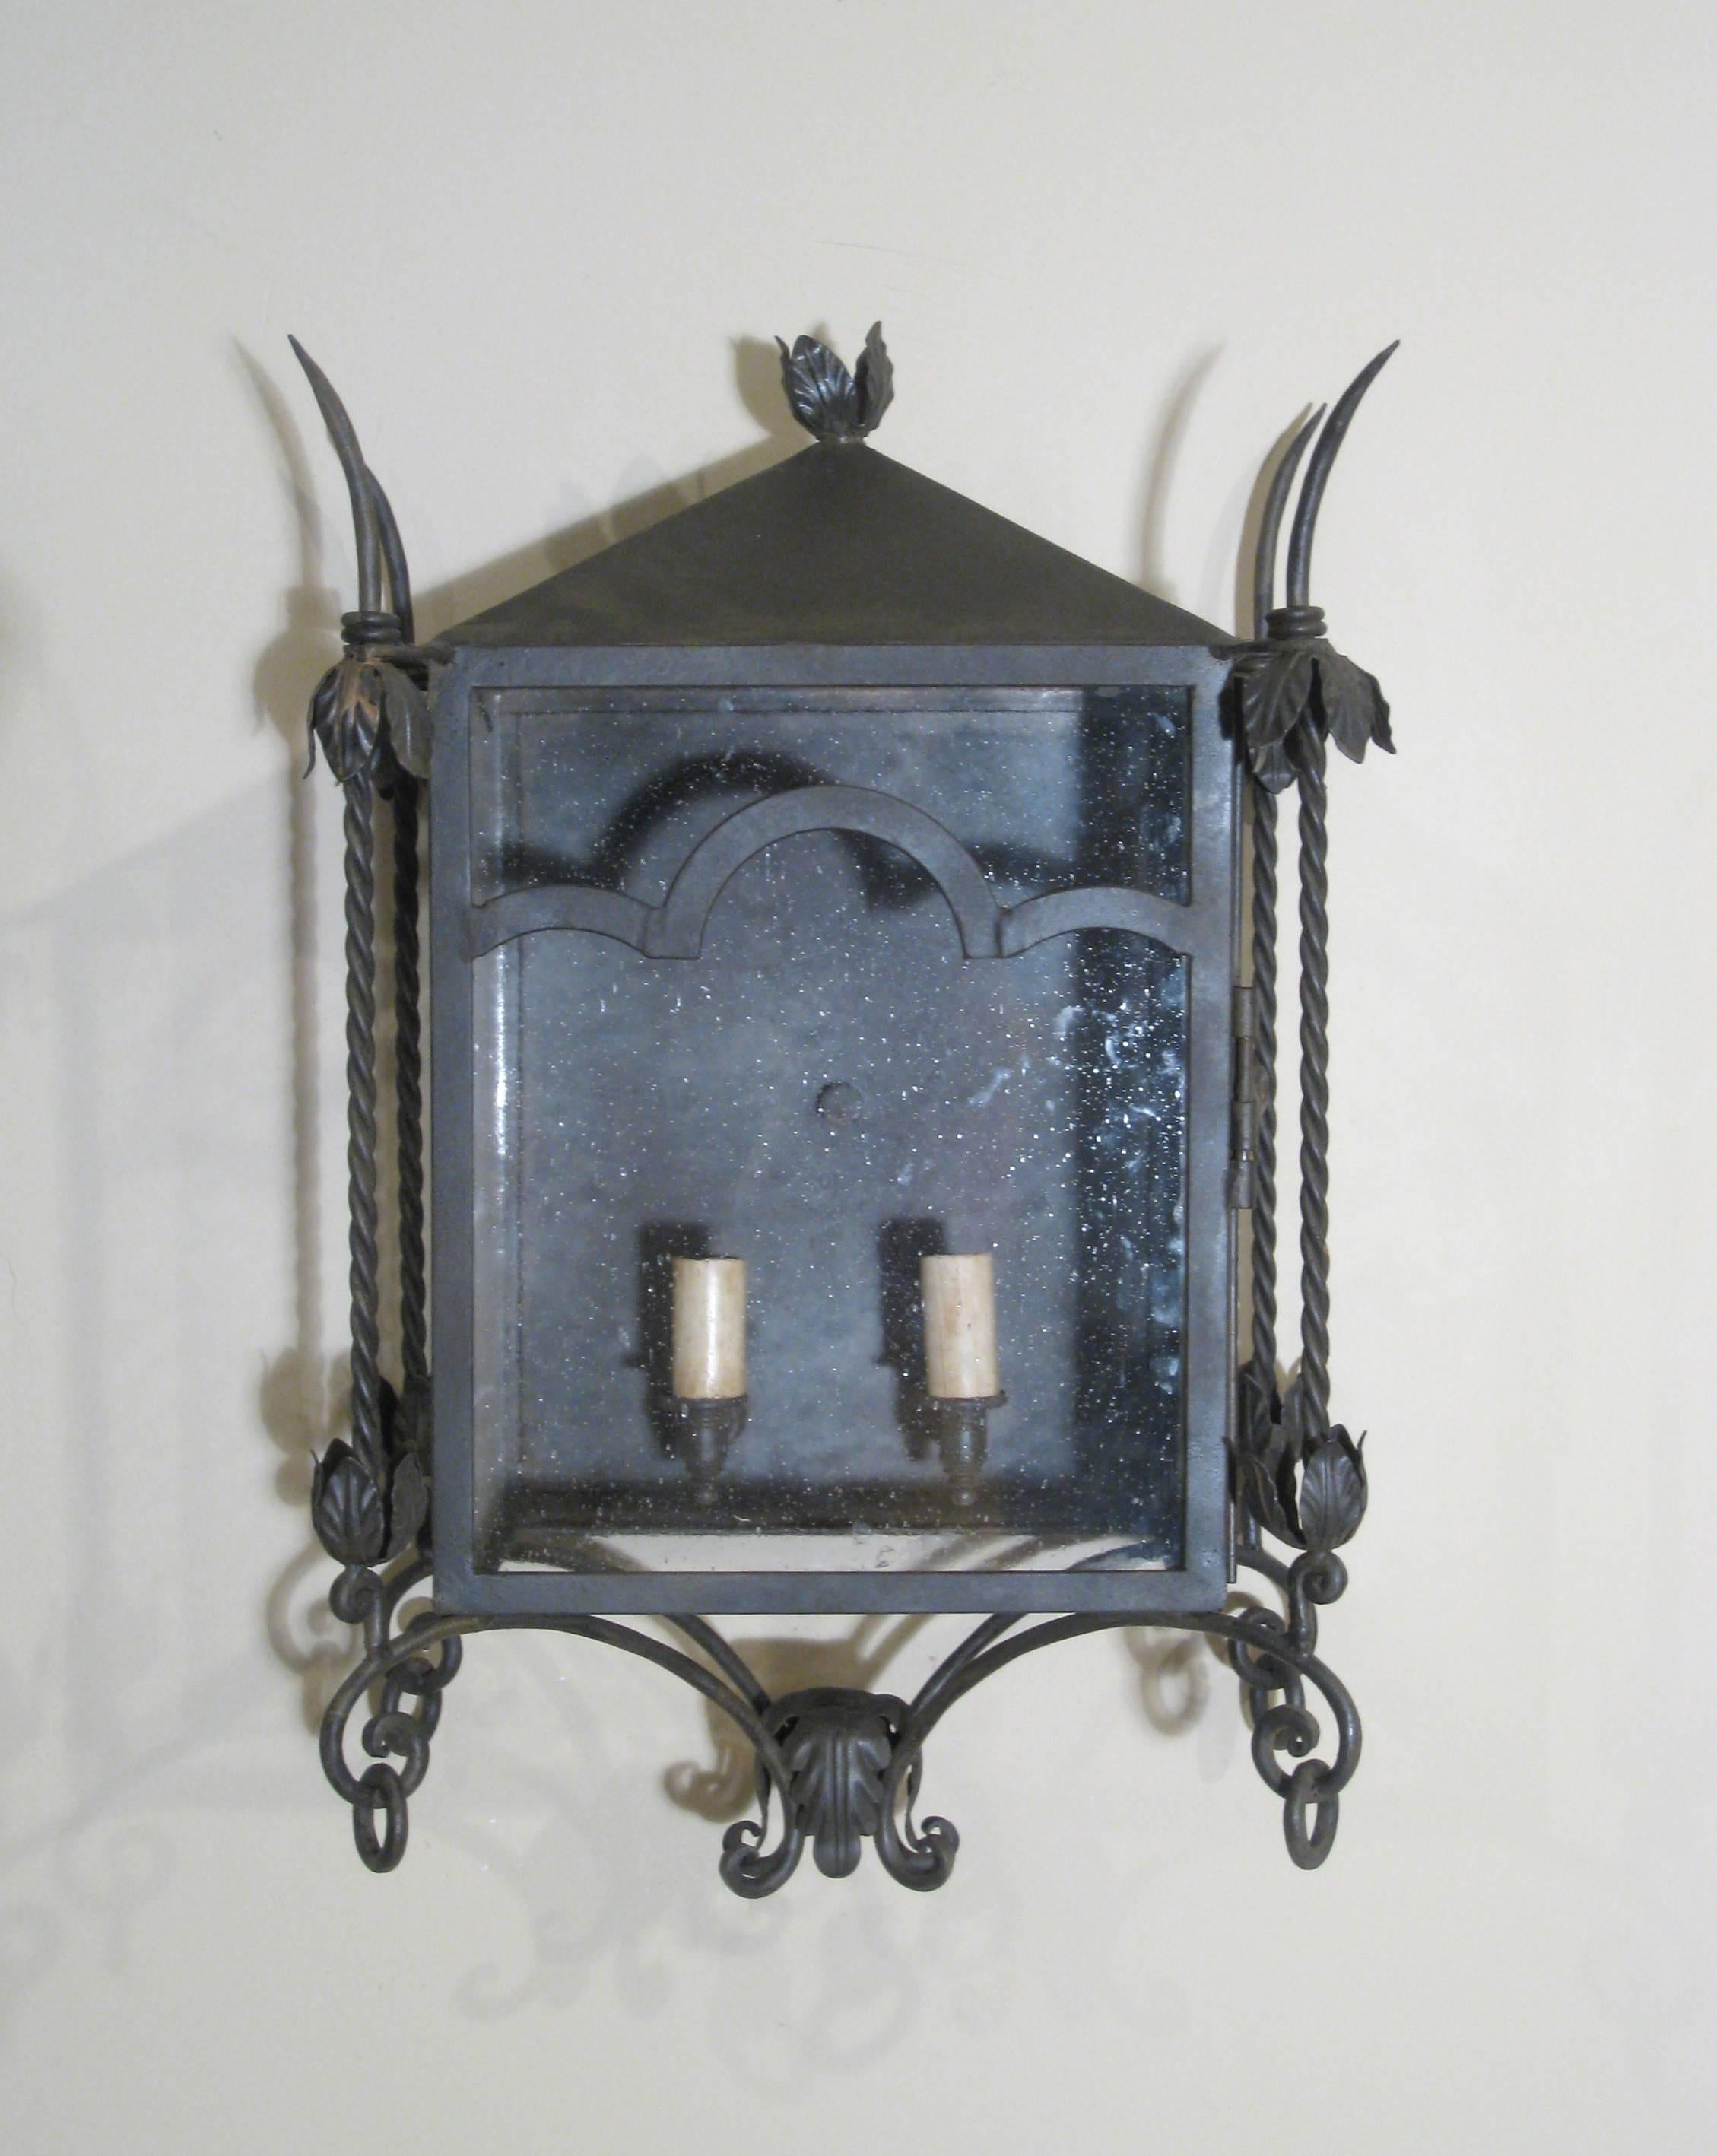 Part of the CHANDELIER Product Line, this is our Italian Wall Mount, Small. This fixture is made for Exterior use and is UL Listed. Two candelabra base bulbs up to 60 watts/socket. Also available in Large Size. This style wall sconce also matches